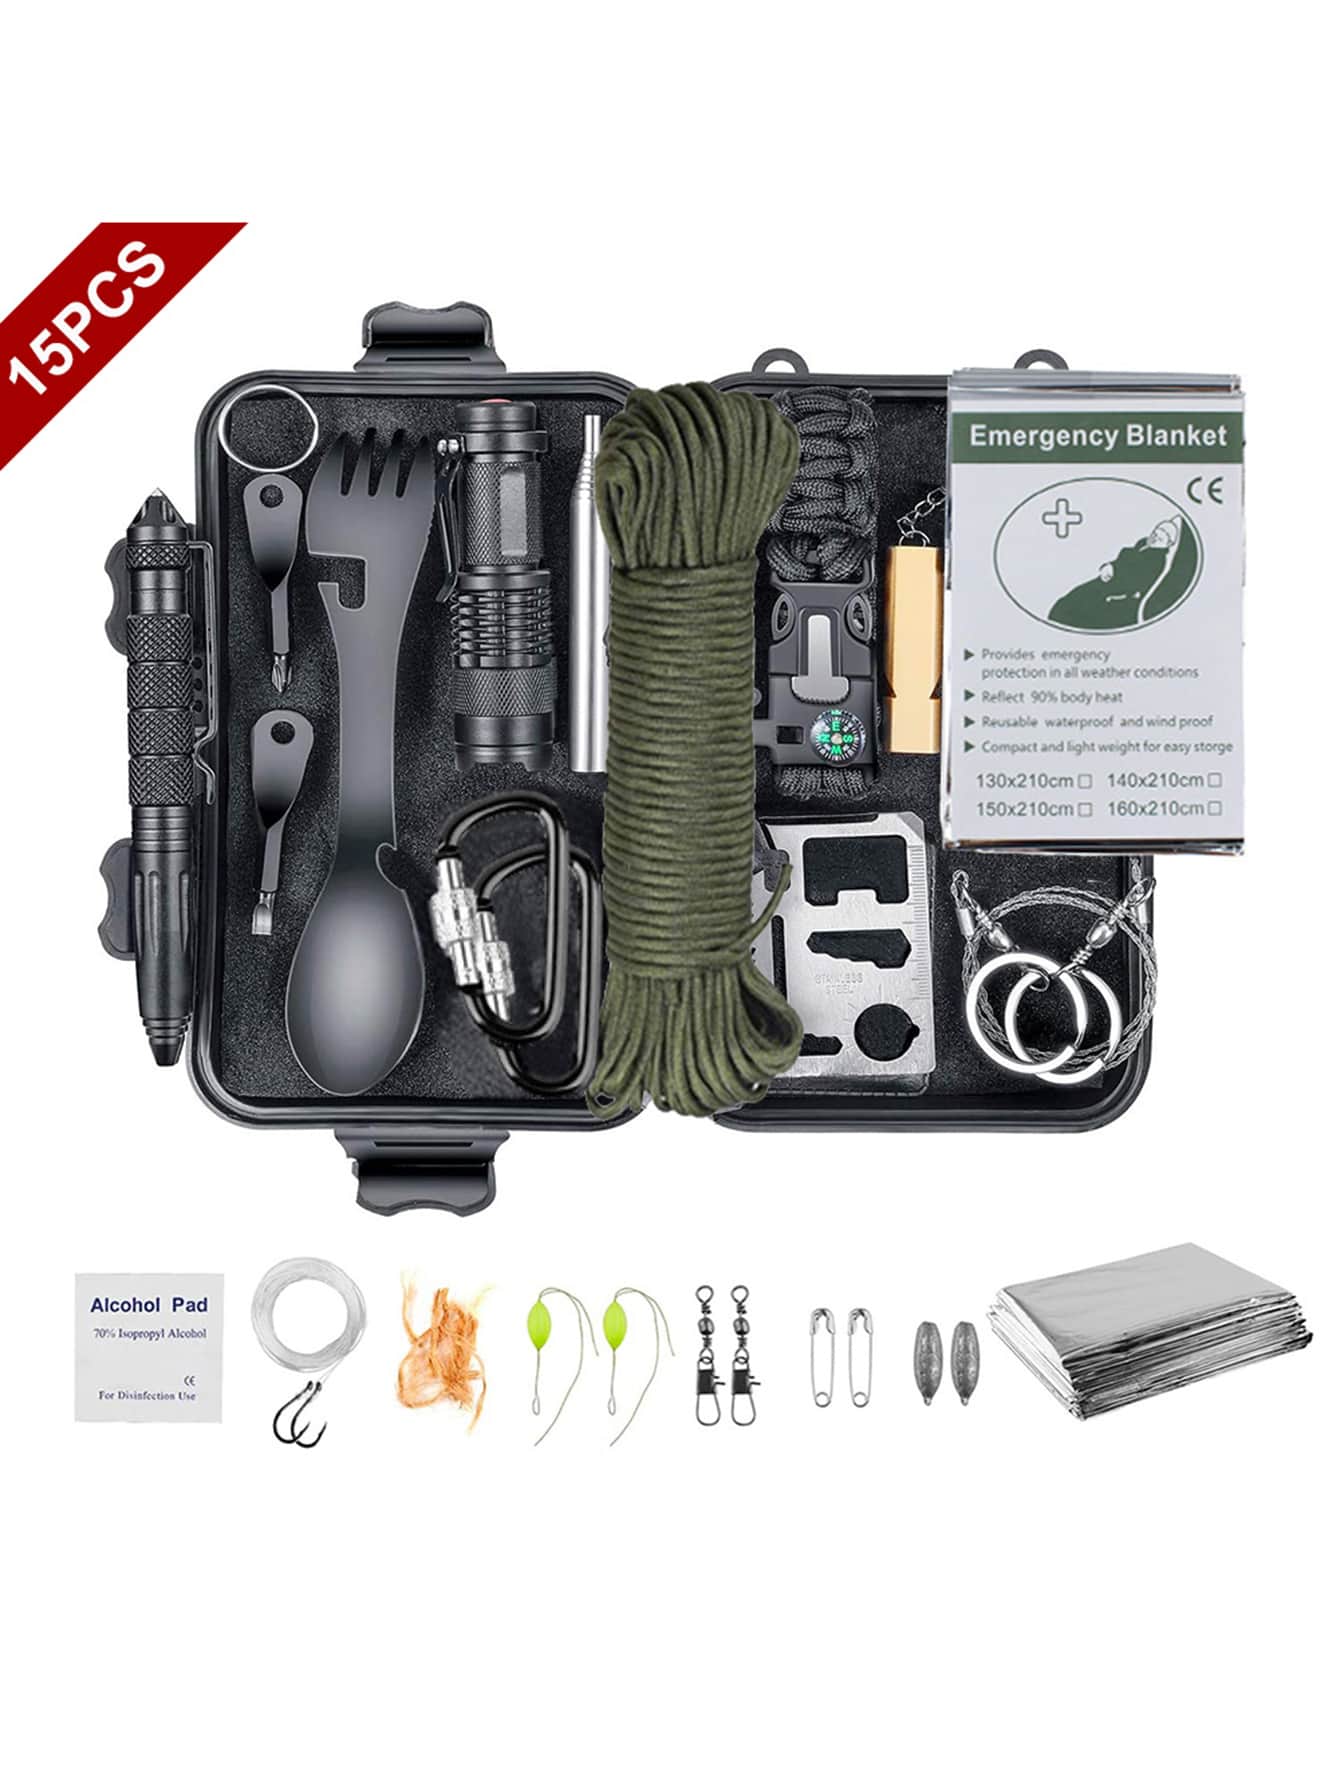 Outdoor Camping Emergency Survival Gear Kit